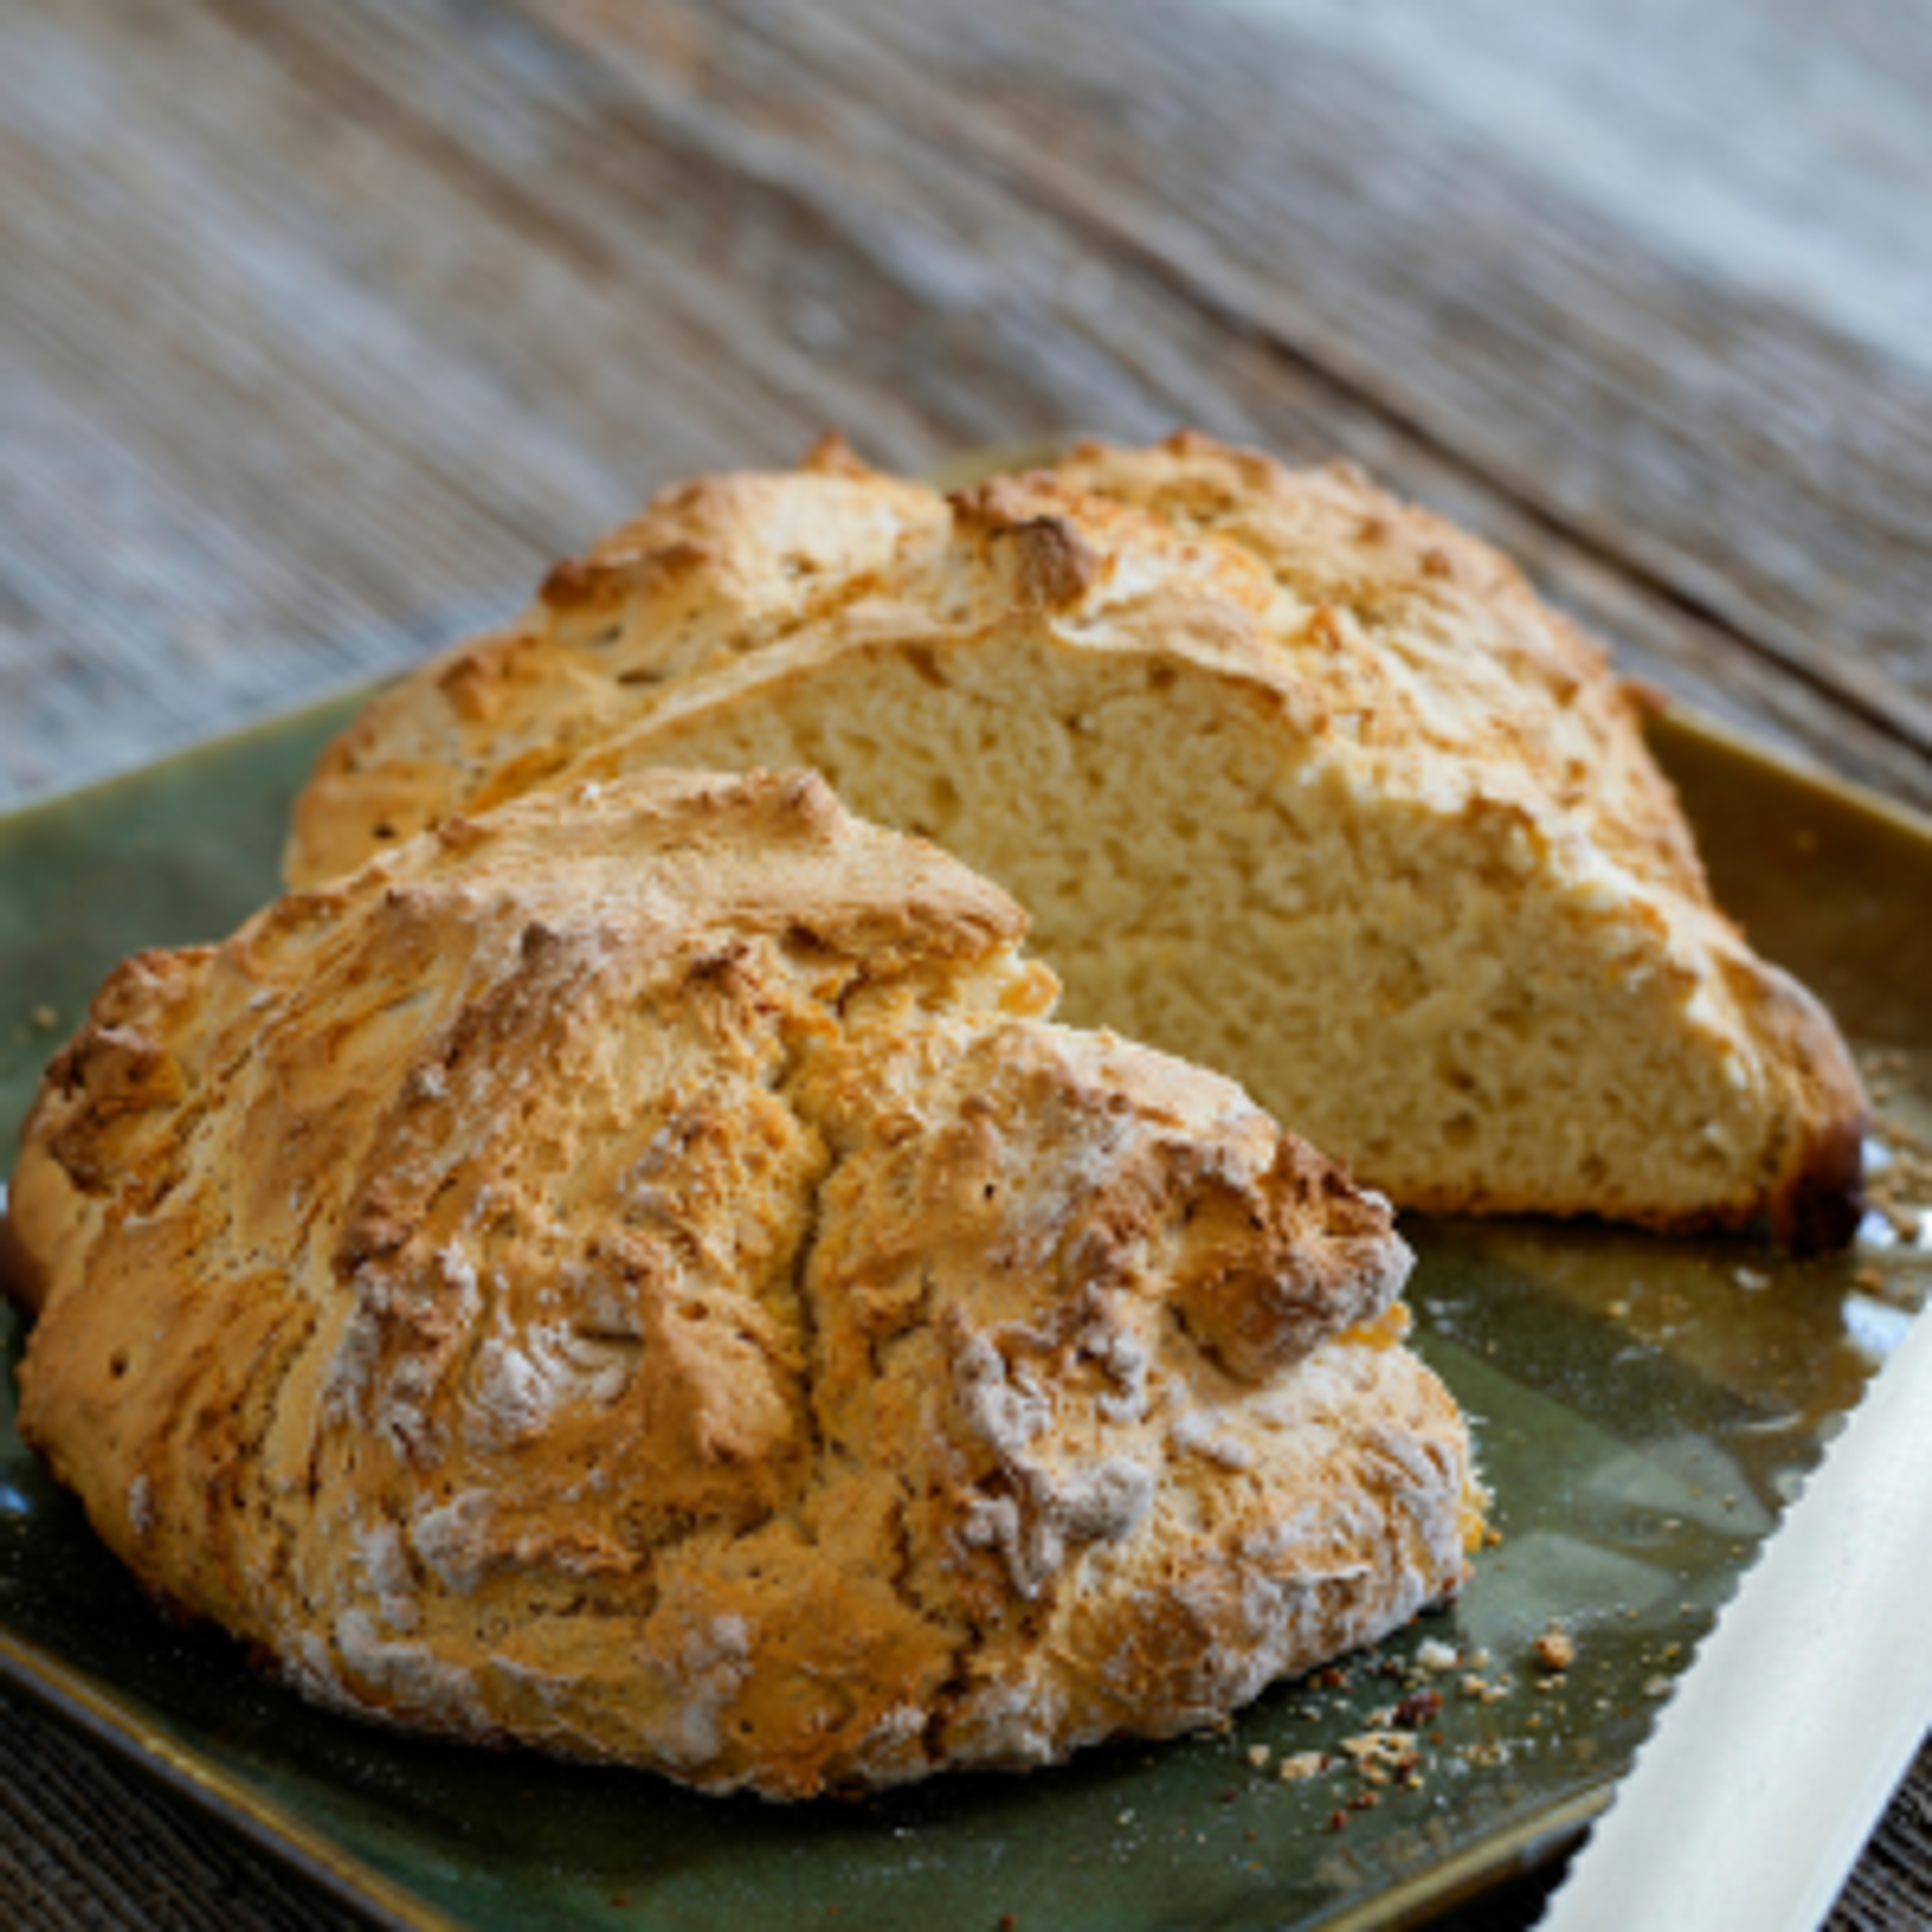 Traditional Irish Soda Bread, first created in the 1830s